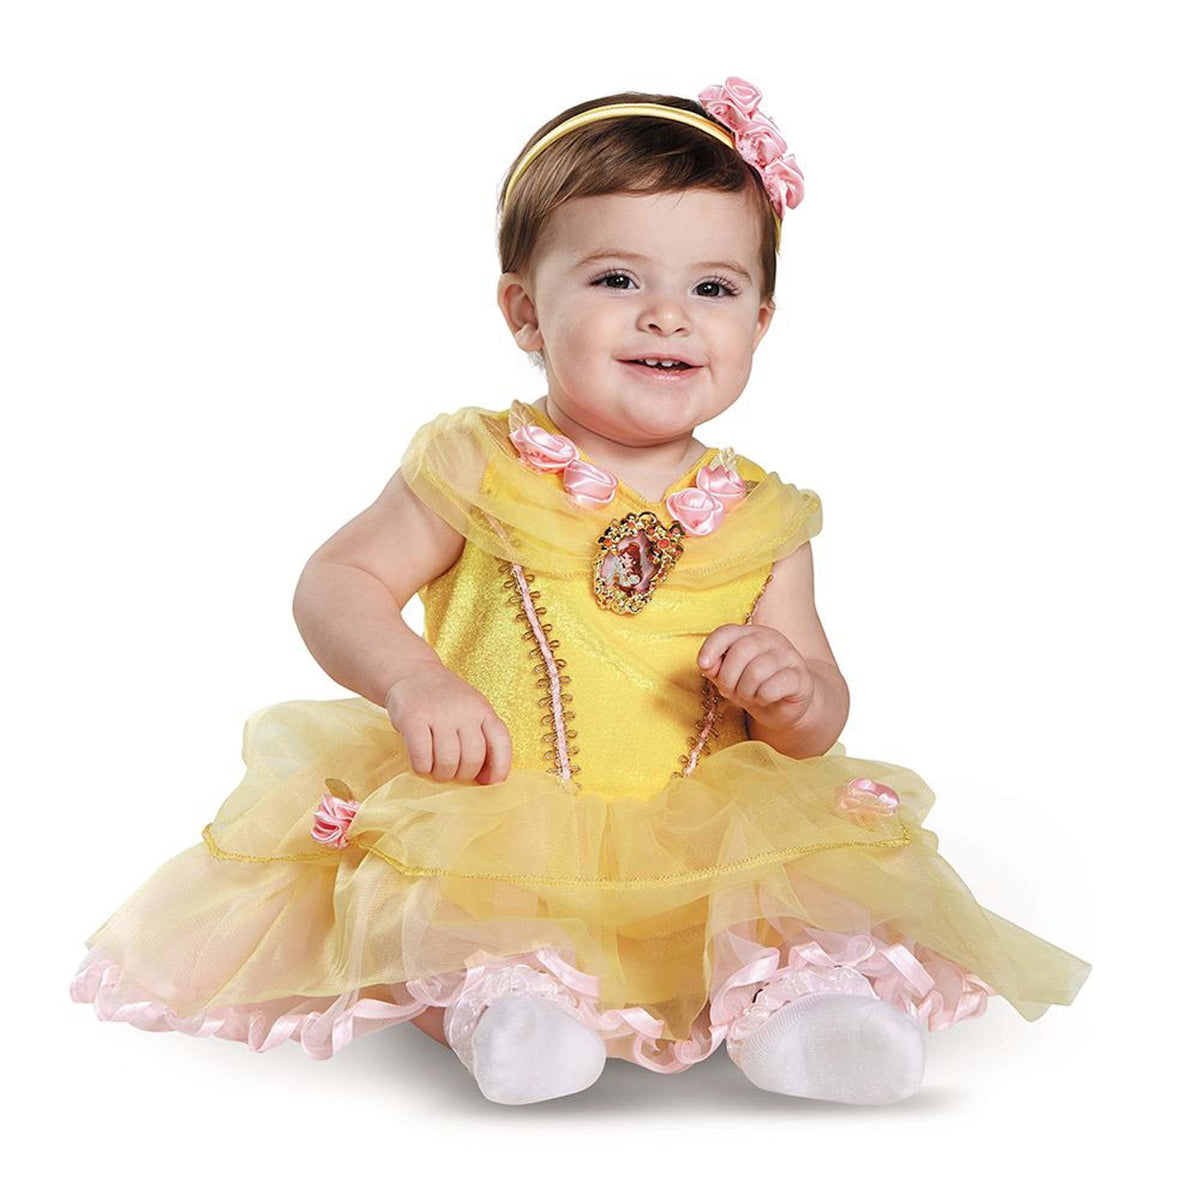 DISGUISE (TOY-SPORT) Costumes Disney Beauty and the Beast Belle Costume for Babies, Yellow Dress